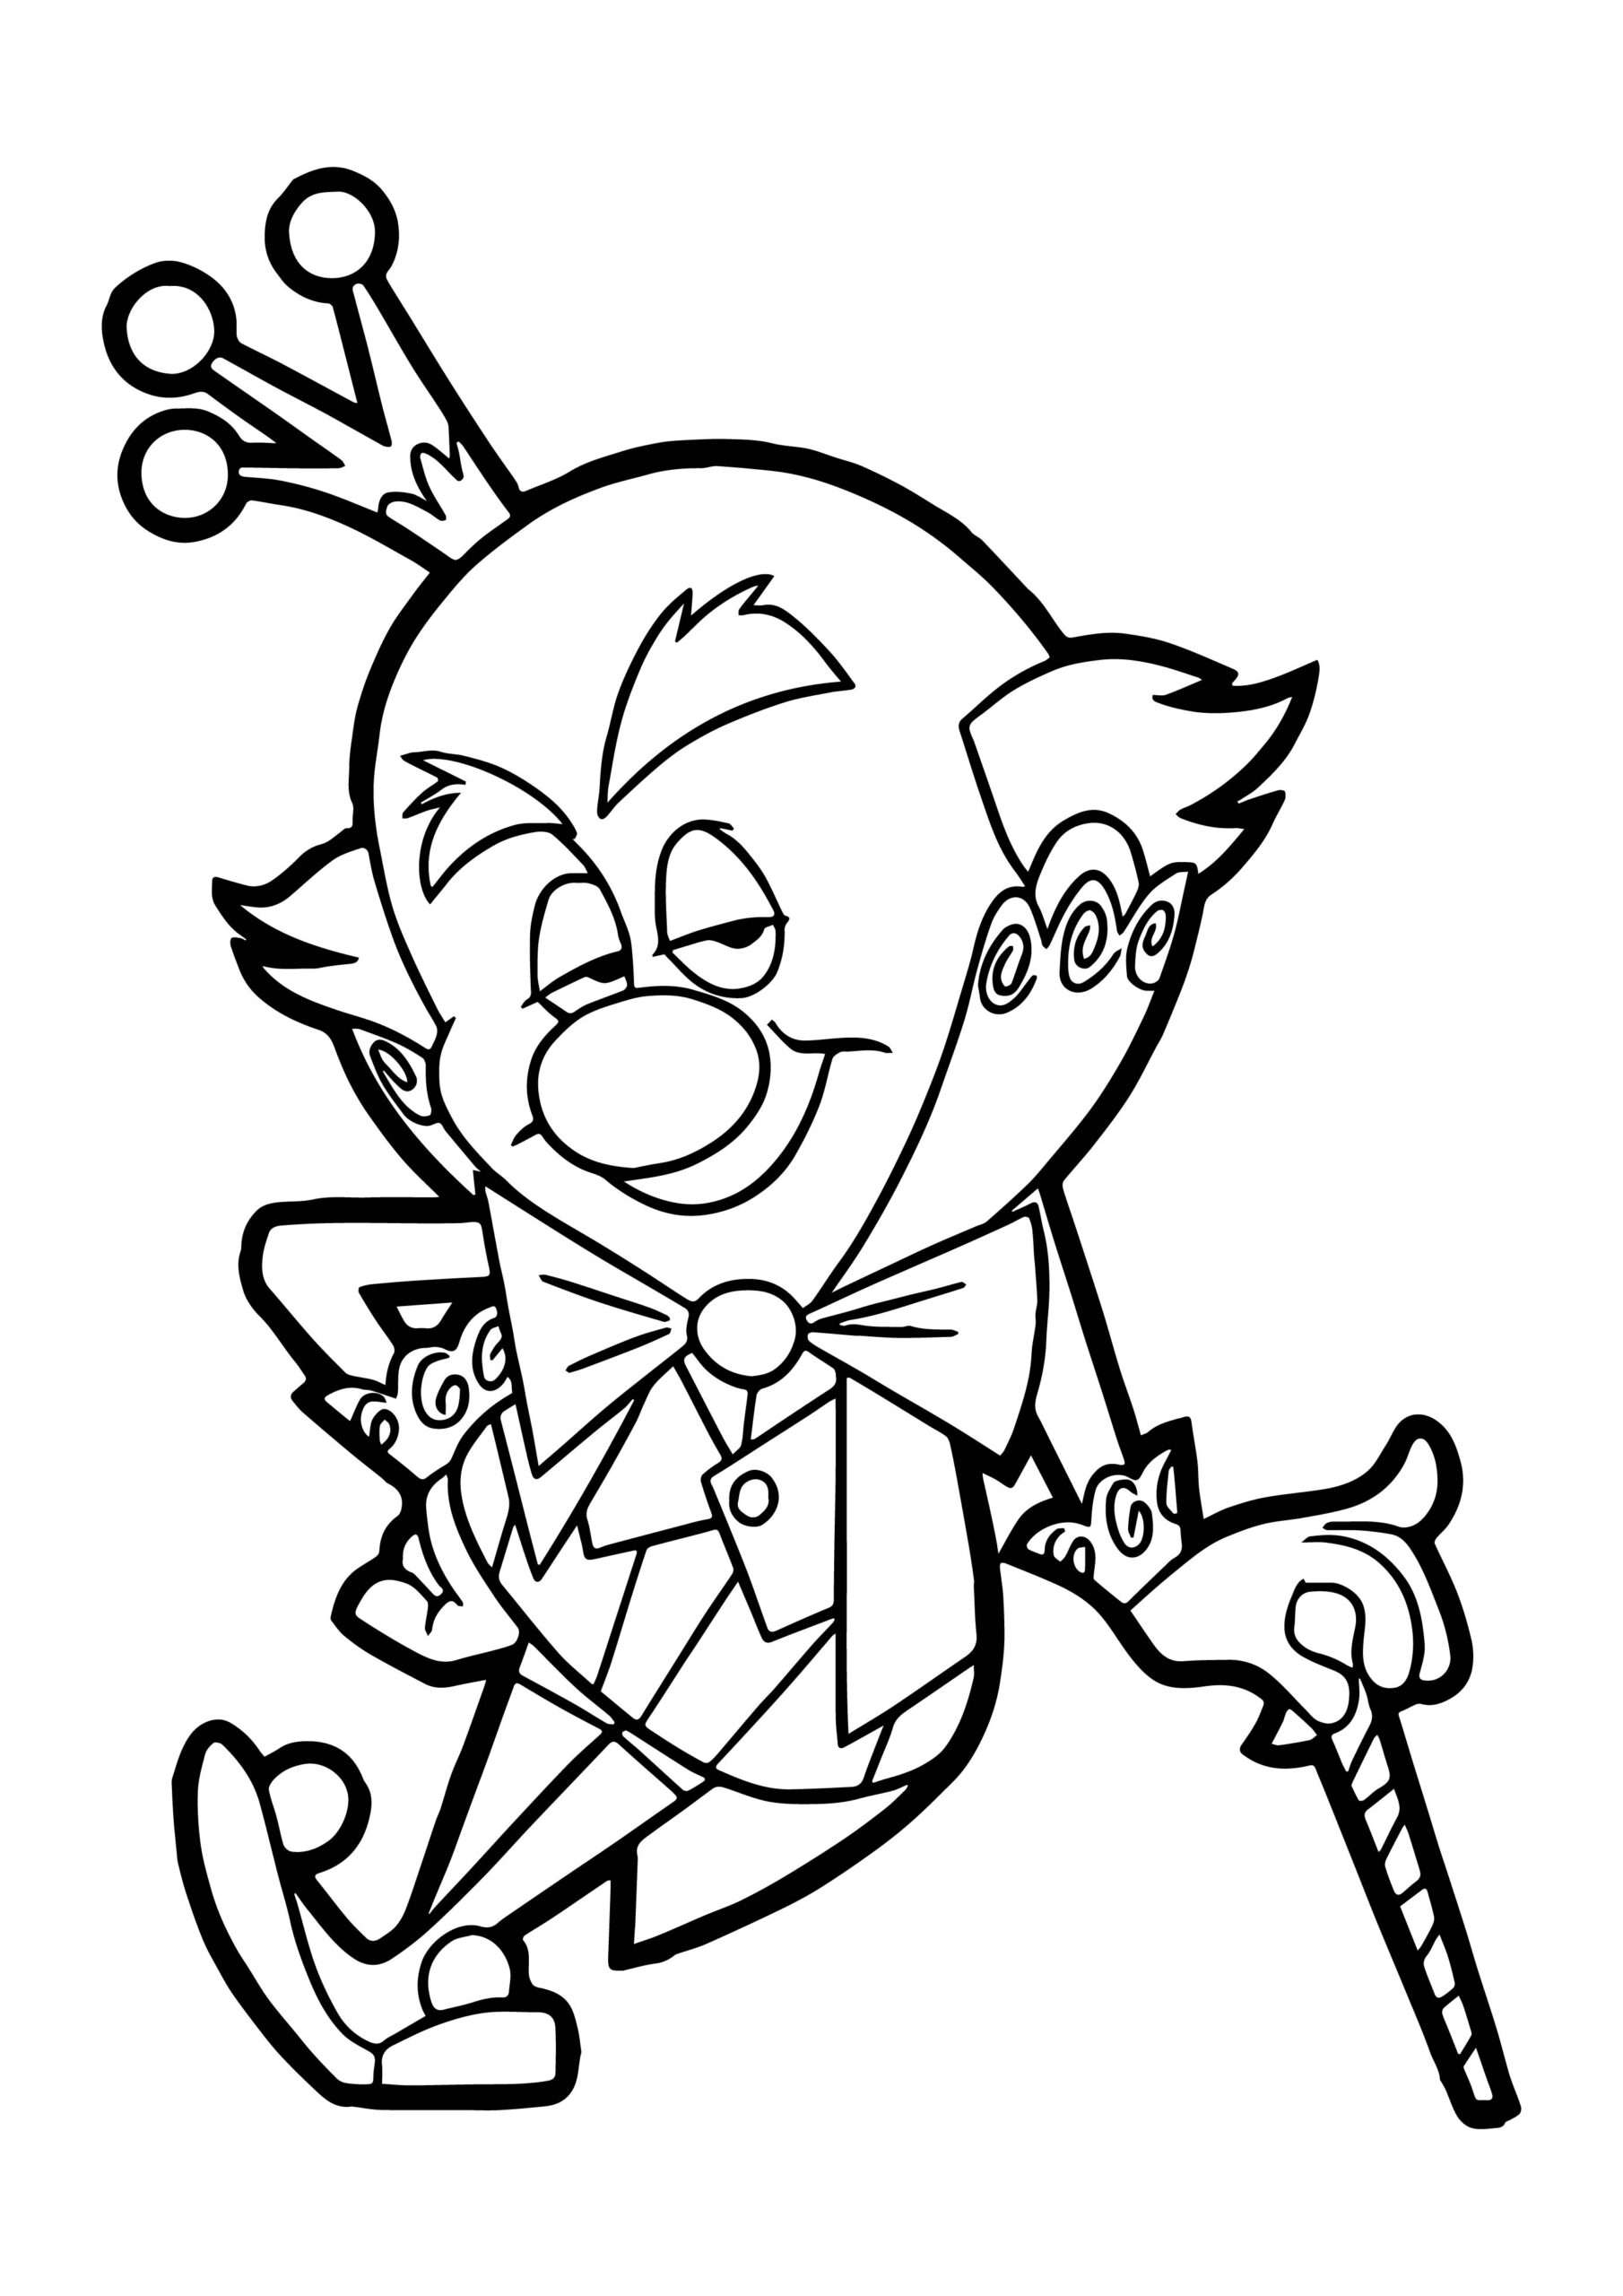 Wreck It Ralph Sugar King is Waiting Coloring Pages